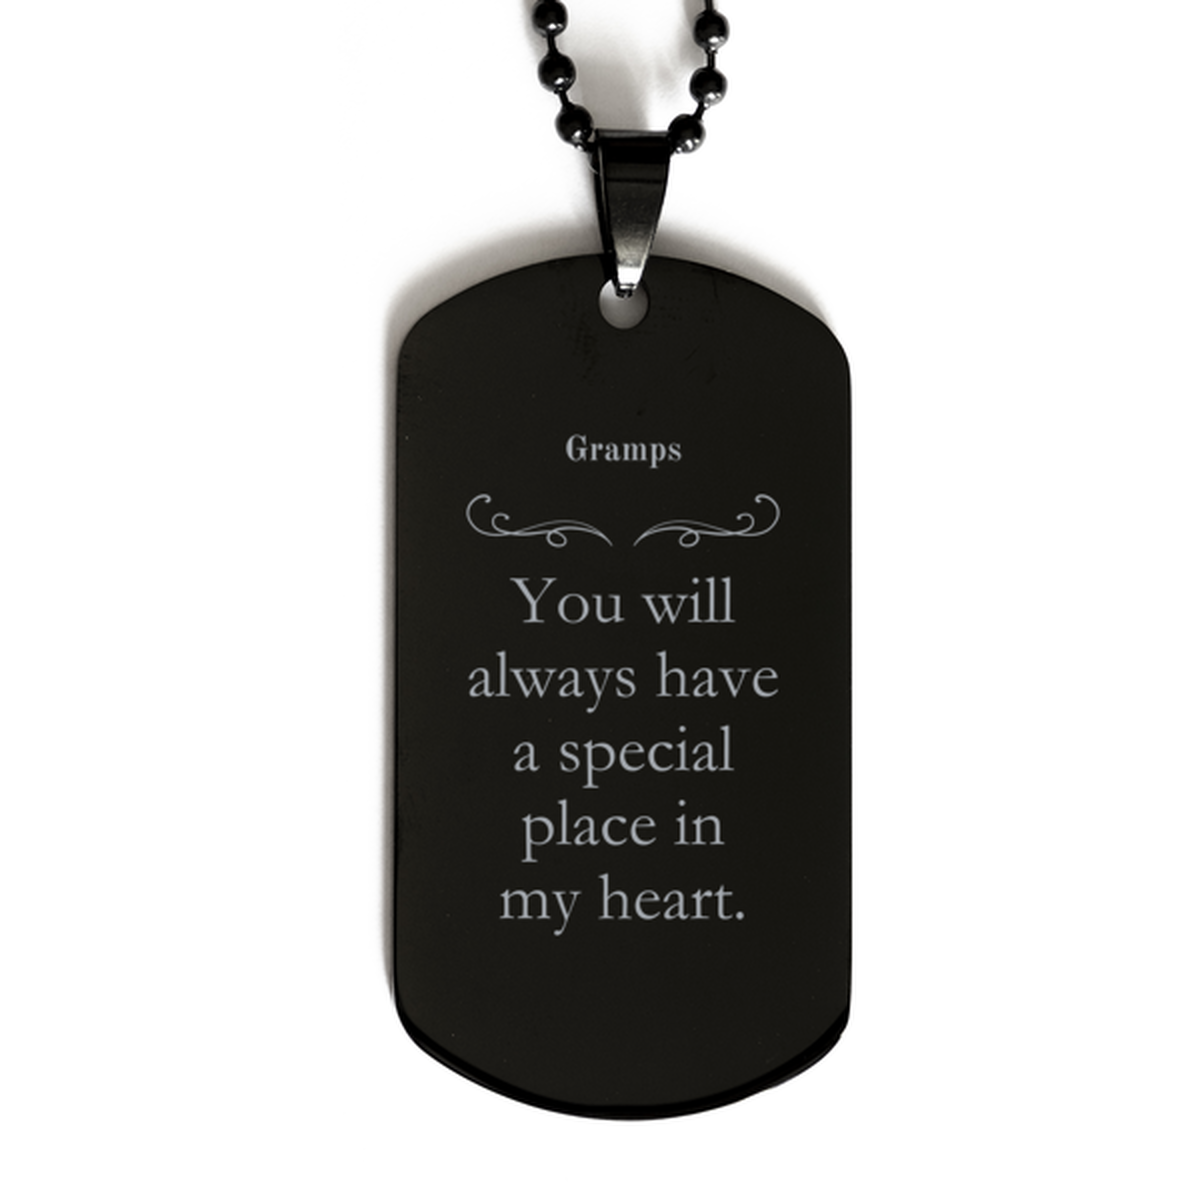 Gramps Black Dog Tag - Special Place in My Heart Engraved Gift for Fathers Day, Birthday, Christmas - Unique and Meaningful Reminder of Love and Appreciation